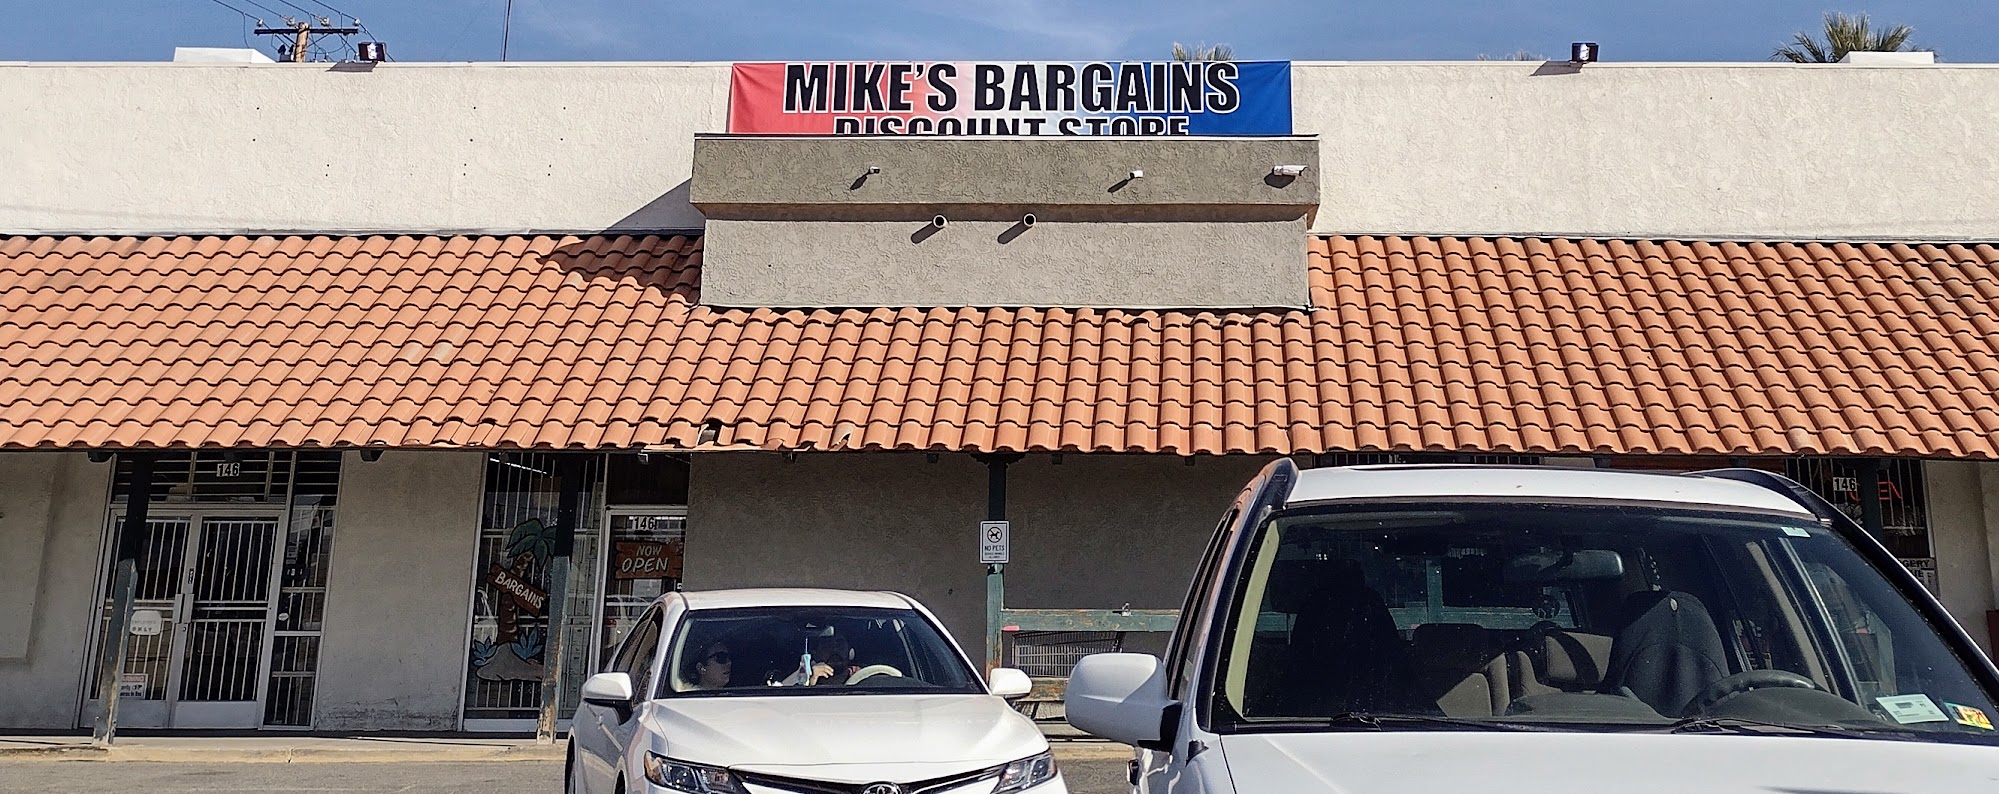 Mike’s Bargain Discount Store